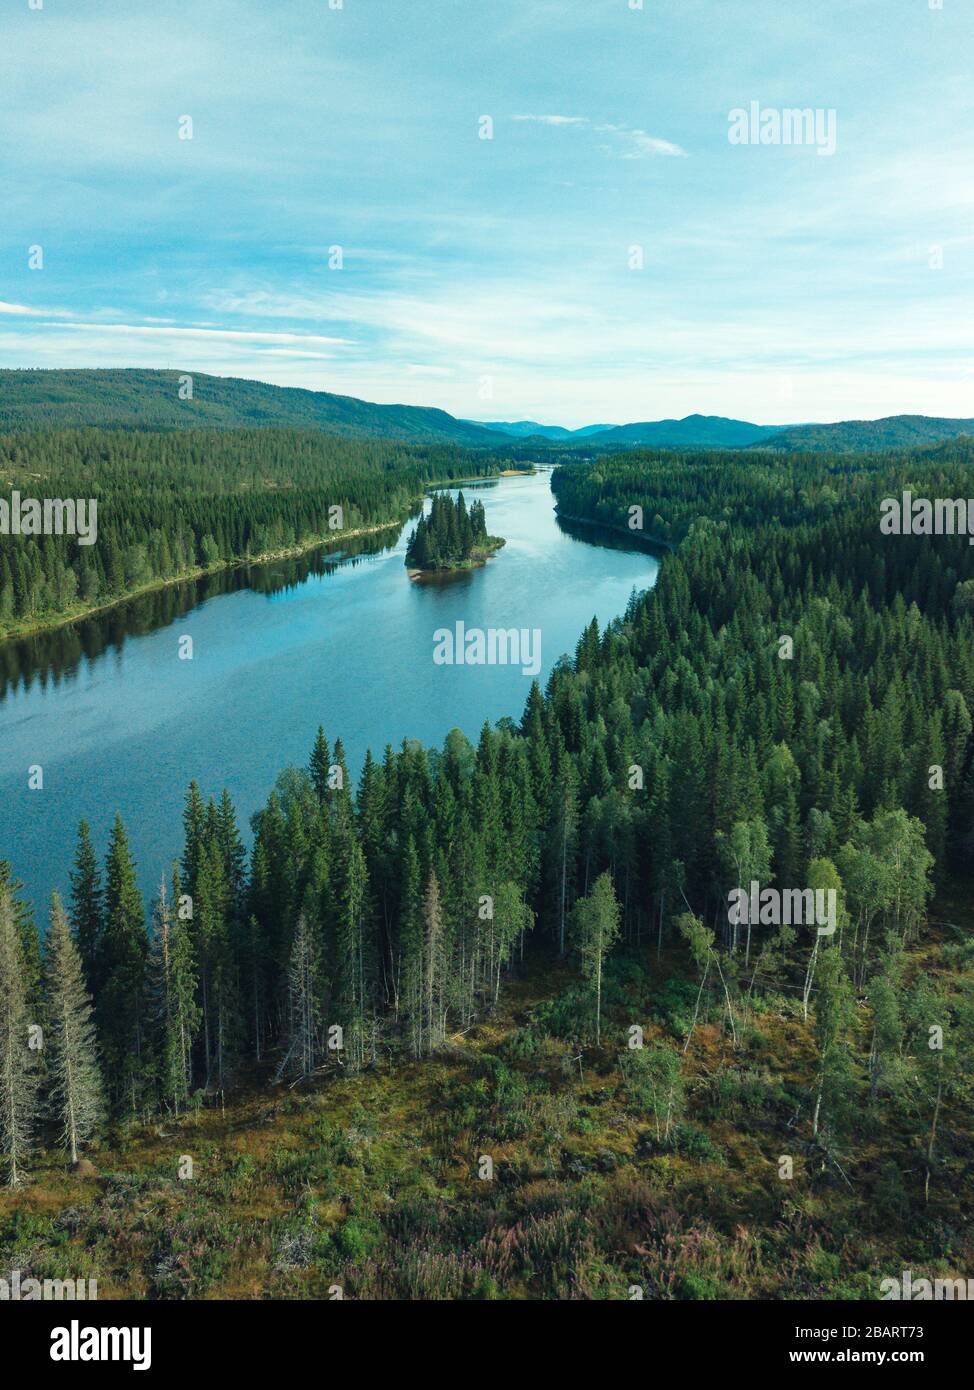 Aerial footage of swedish pine forrest with a river Stock Photo